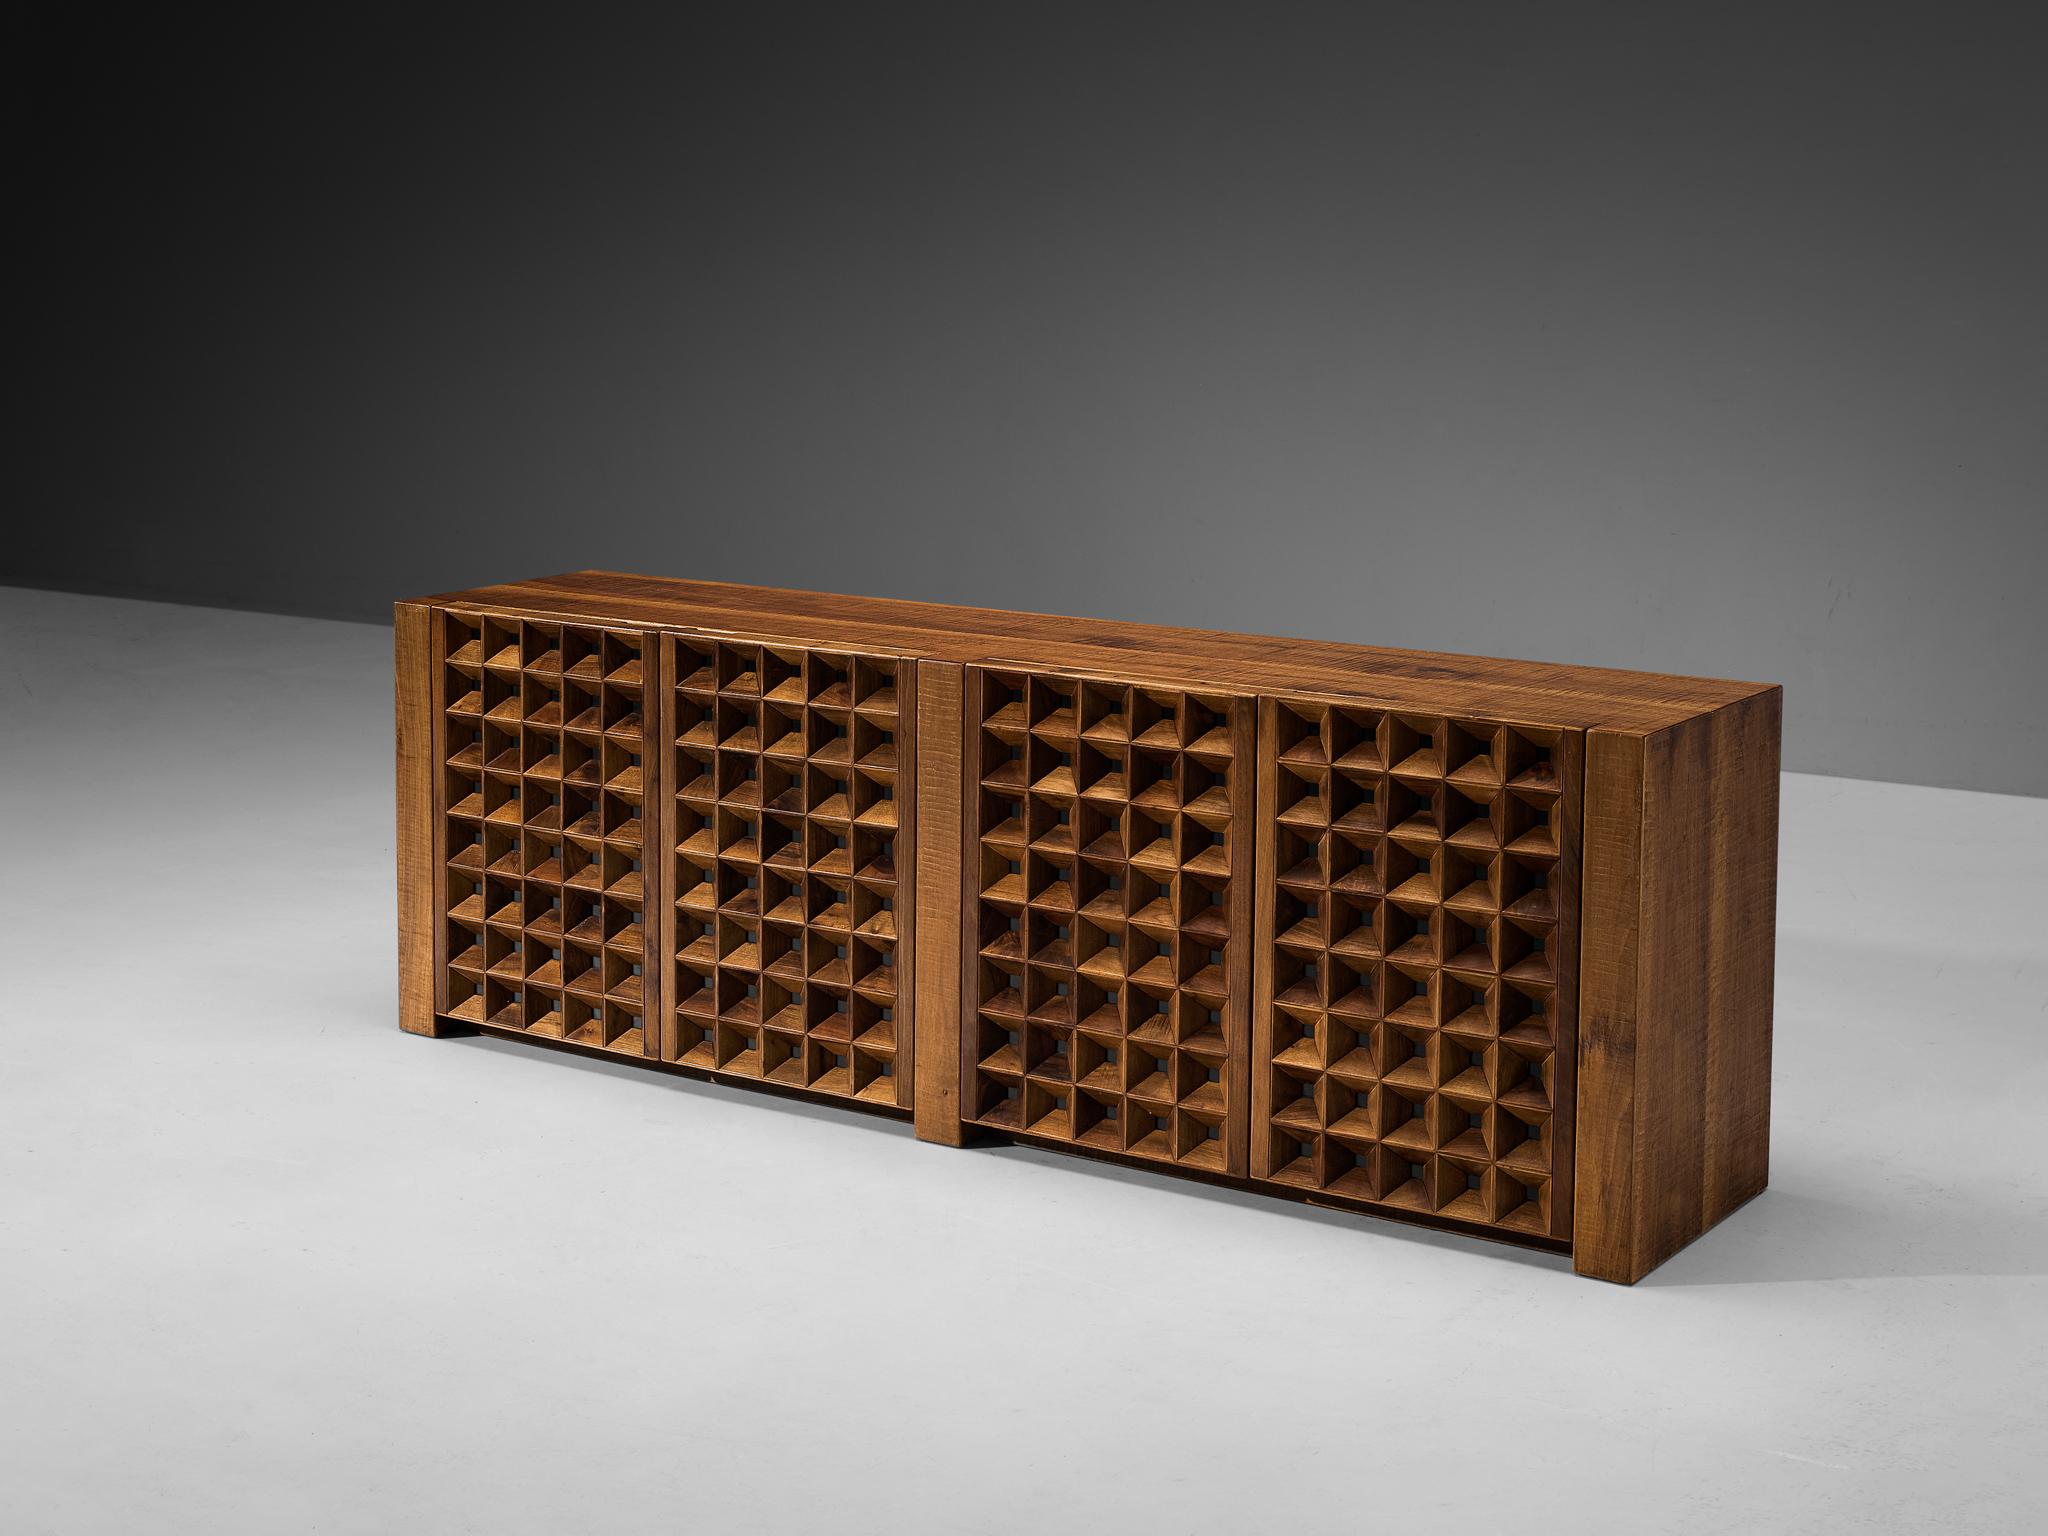 Giuseppe Rivadossi for Officina Rivadossi, sideboard, walnut, glass, Italy, 1980s

An exceptional credenza by the Italian sculptor and designer Giuseppe Rivadossi, featuring a high level of craftsmanship in woodwork. The door panels feature square